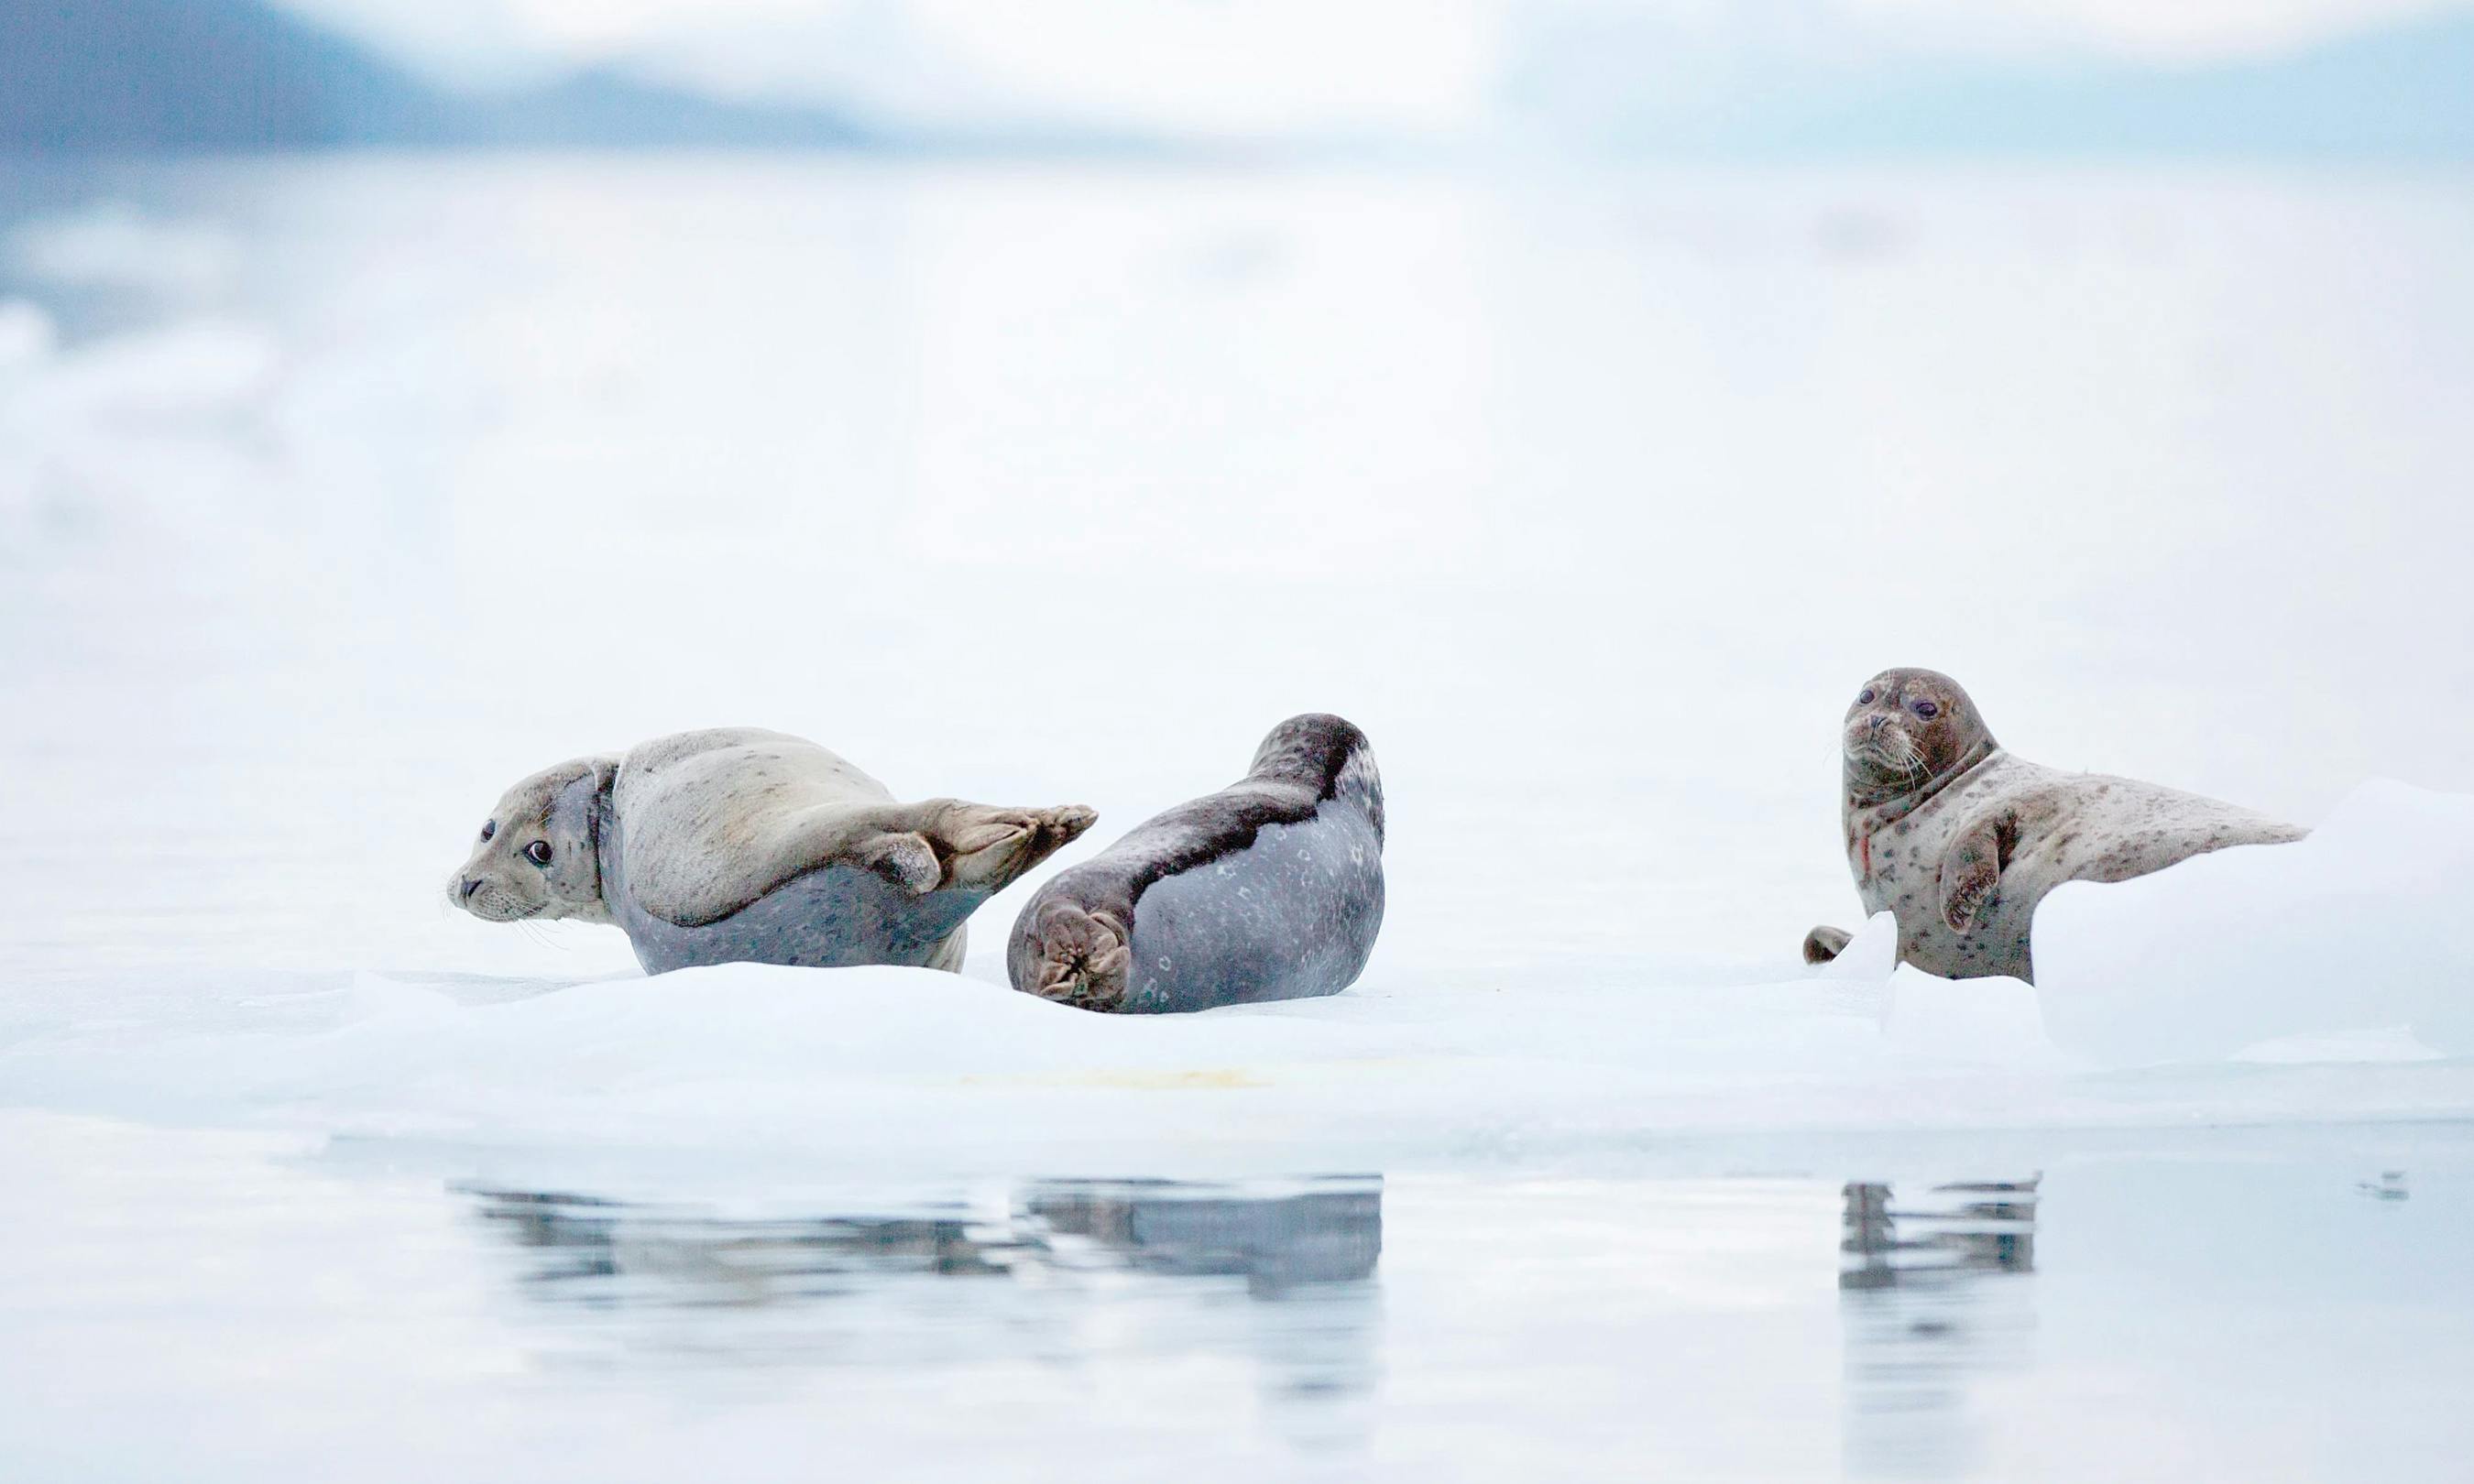 On the Northwest Passage, seal pups are among numerous wildlife you'll see along the way